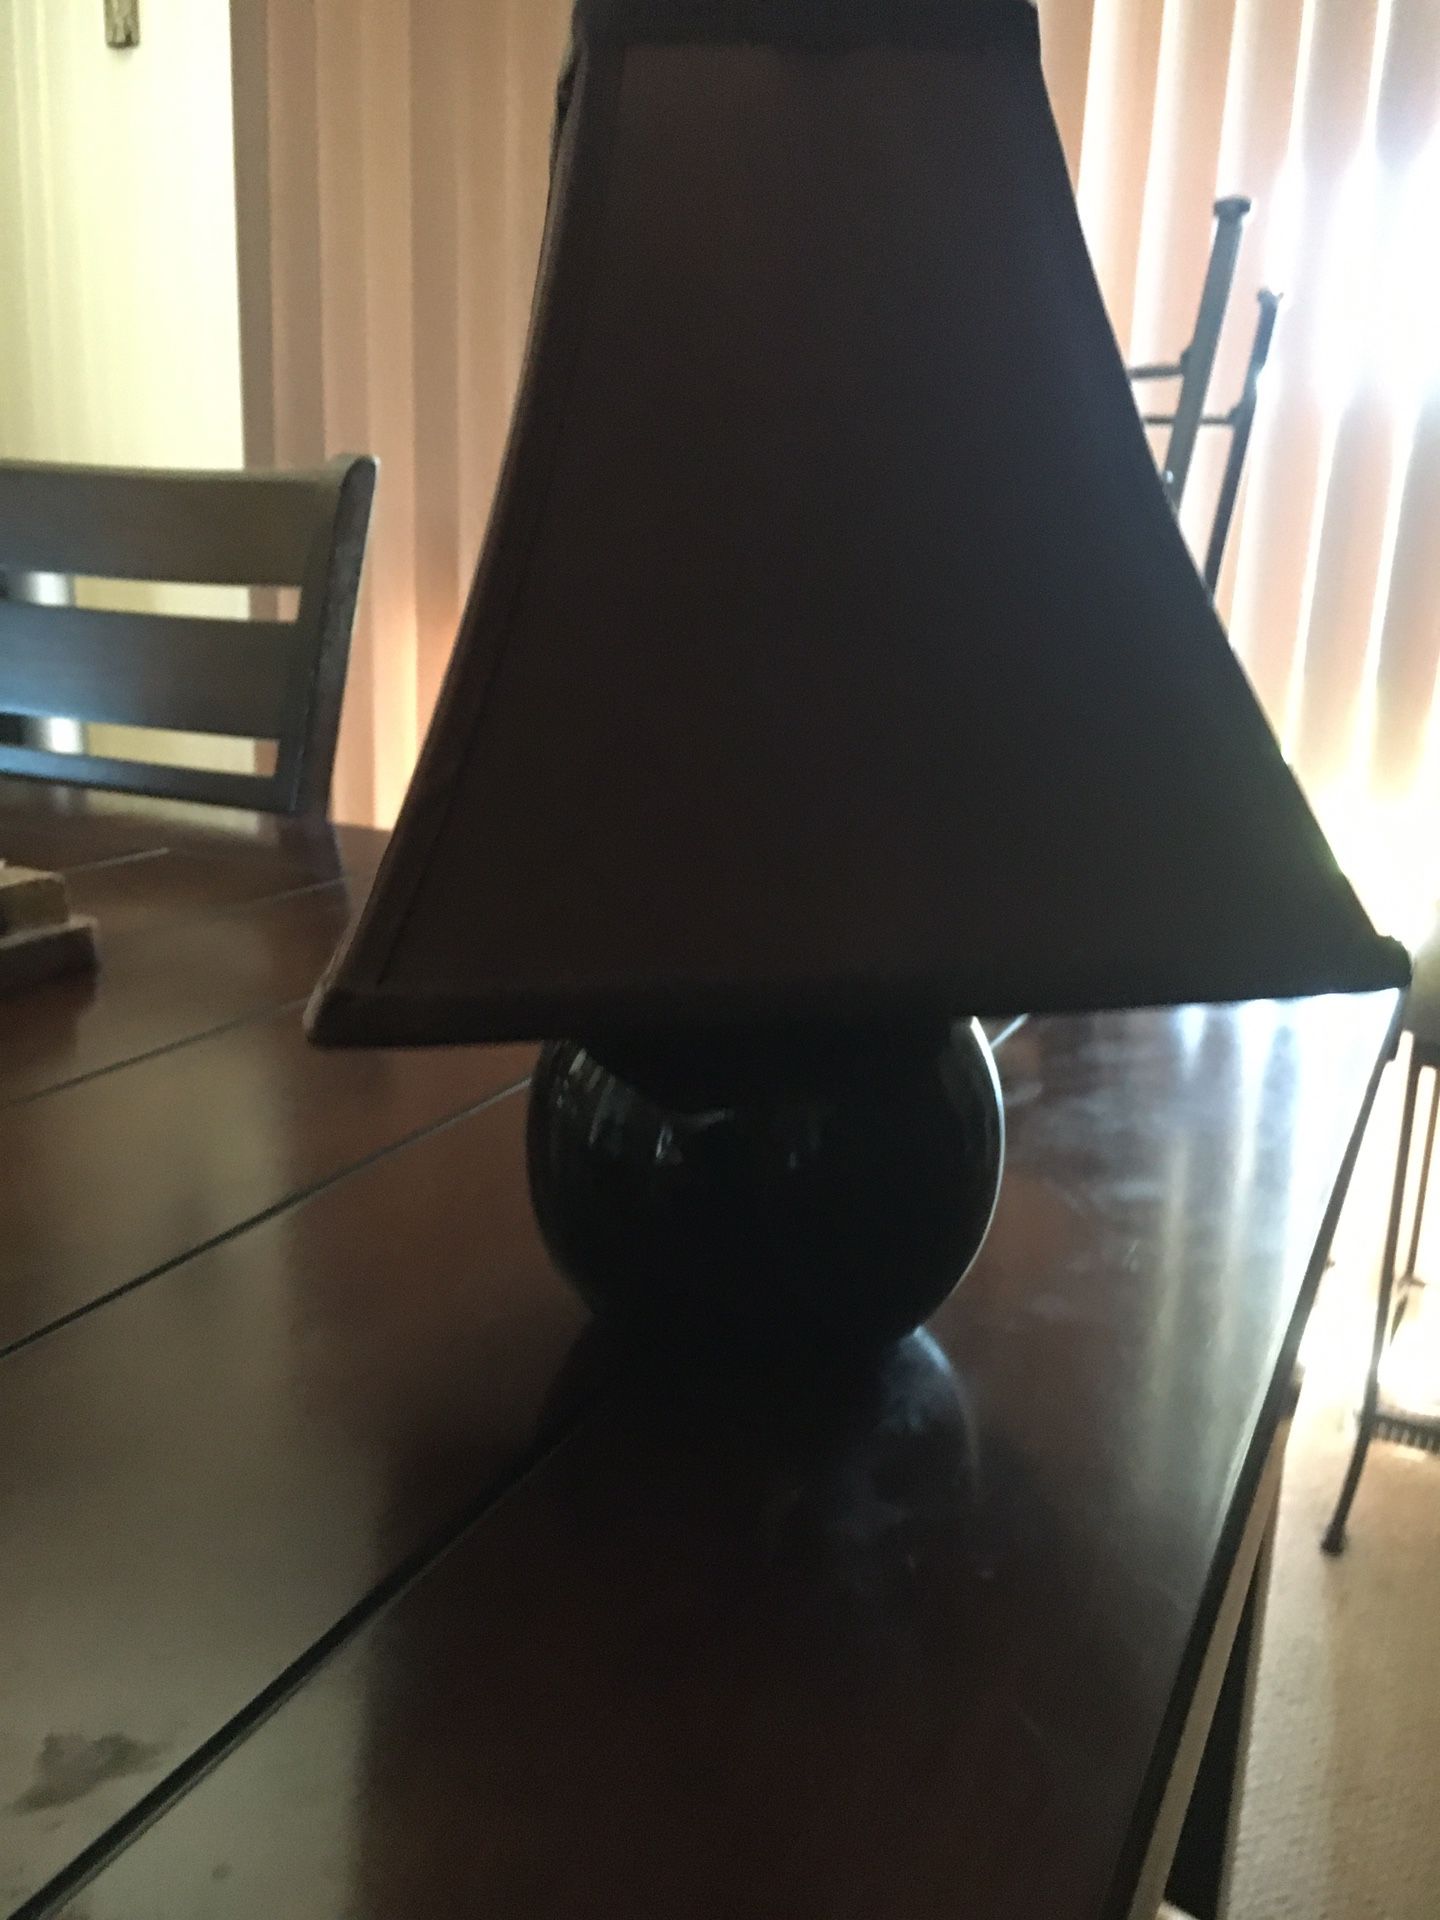 Small Lamp (black with brown lampshade)